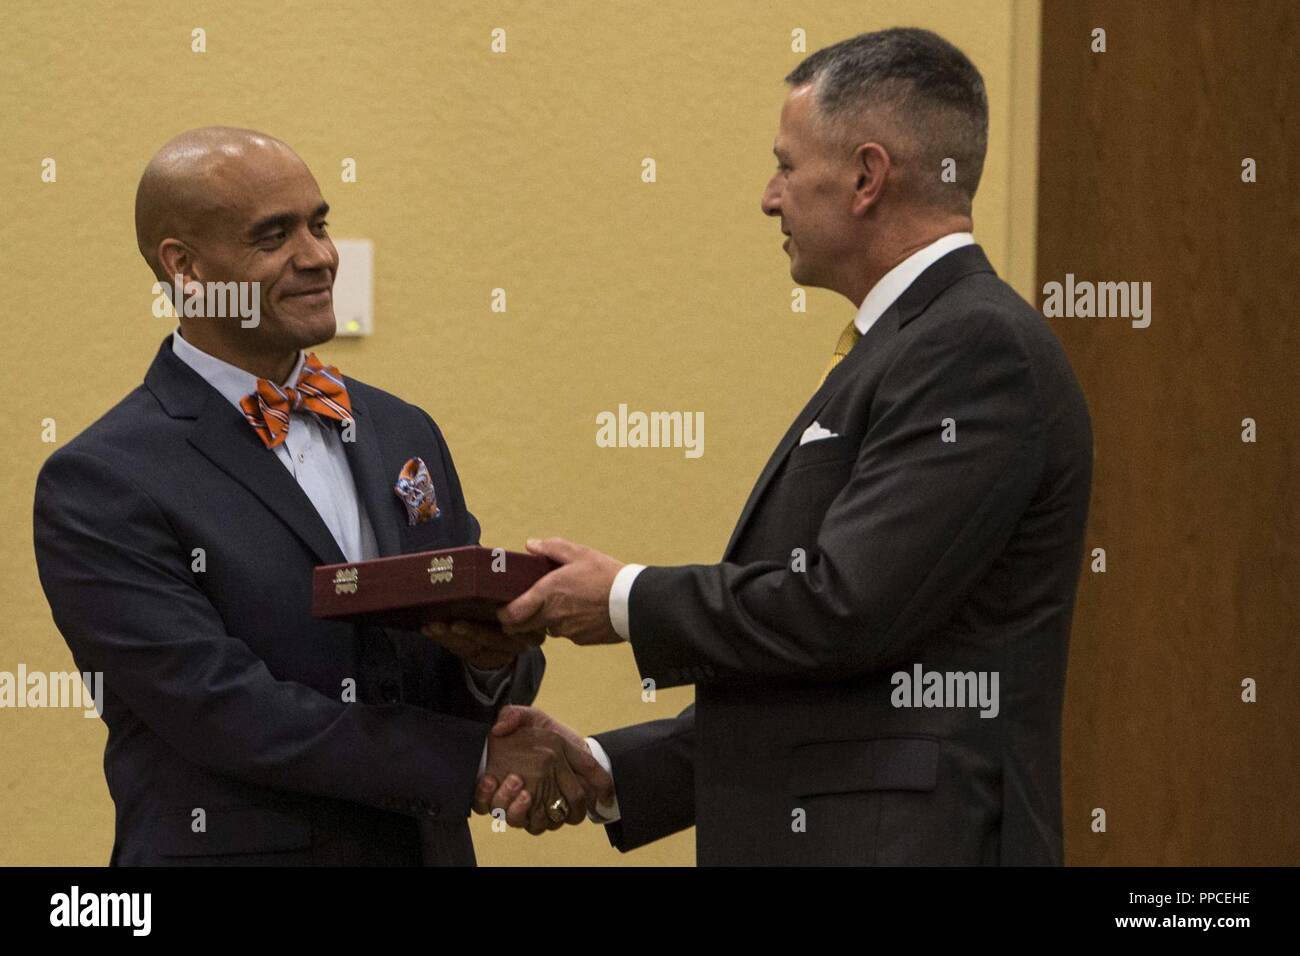 Col. William C. Gray, 6th Marine Corps District commanding officer, presents a gift to Sgt. Maj. Rafael Rodriguez, the Eastern Recruiting Region and Marine Corps Recruit Depot Parris Island sergeant major, during a professional dinner at the 8412 Symposium at Keesler Air Force Base, Mississippi, Aug. 23, 2018. The symposium brought all 6th MCD career recruiters, sergeants major and commanding officers together to provide information, develop updated recruiting products, and conduct sustainment training for the professional development of the recruiting force. Stock Photo